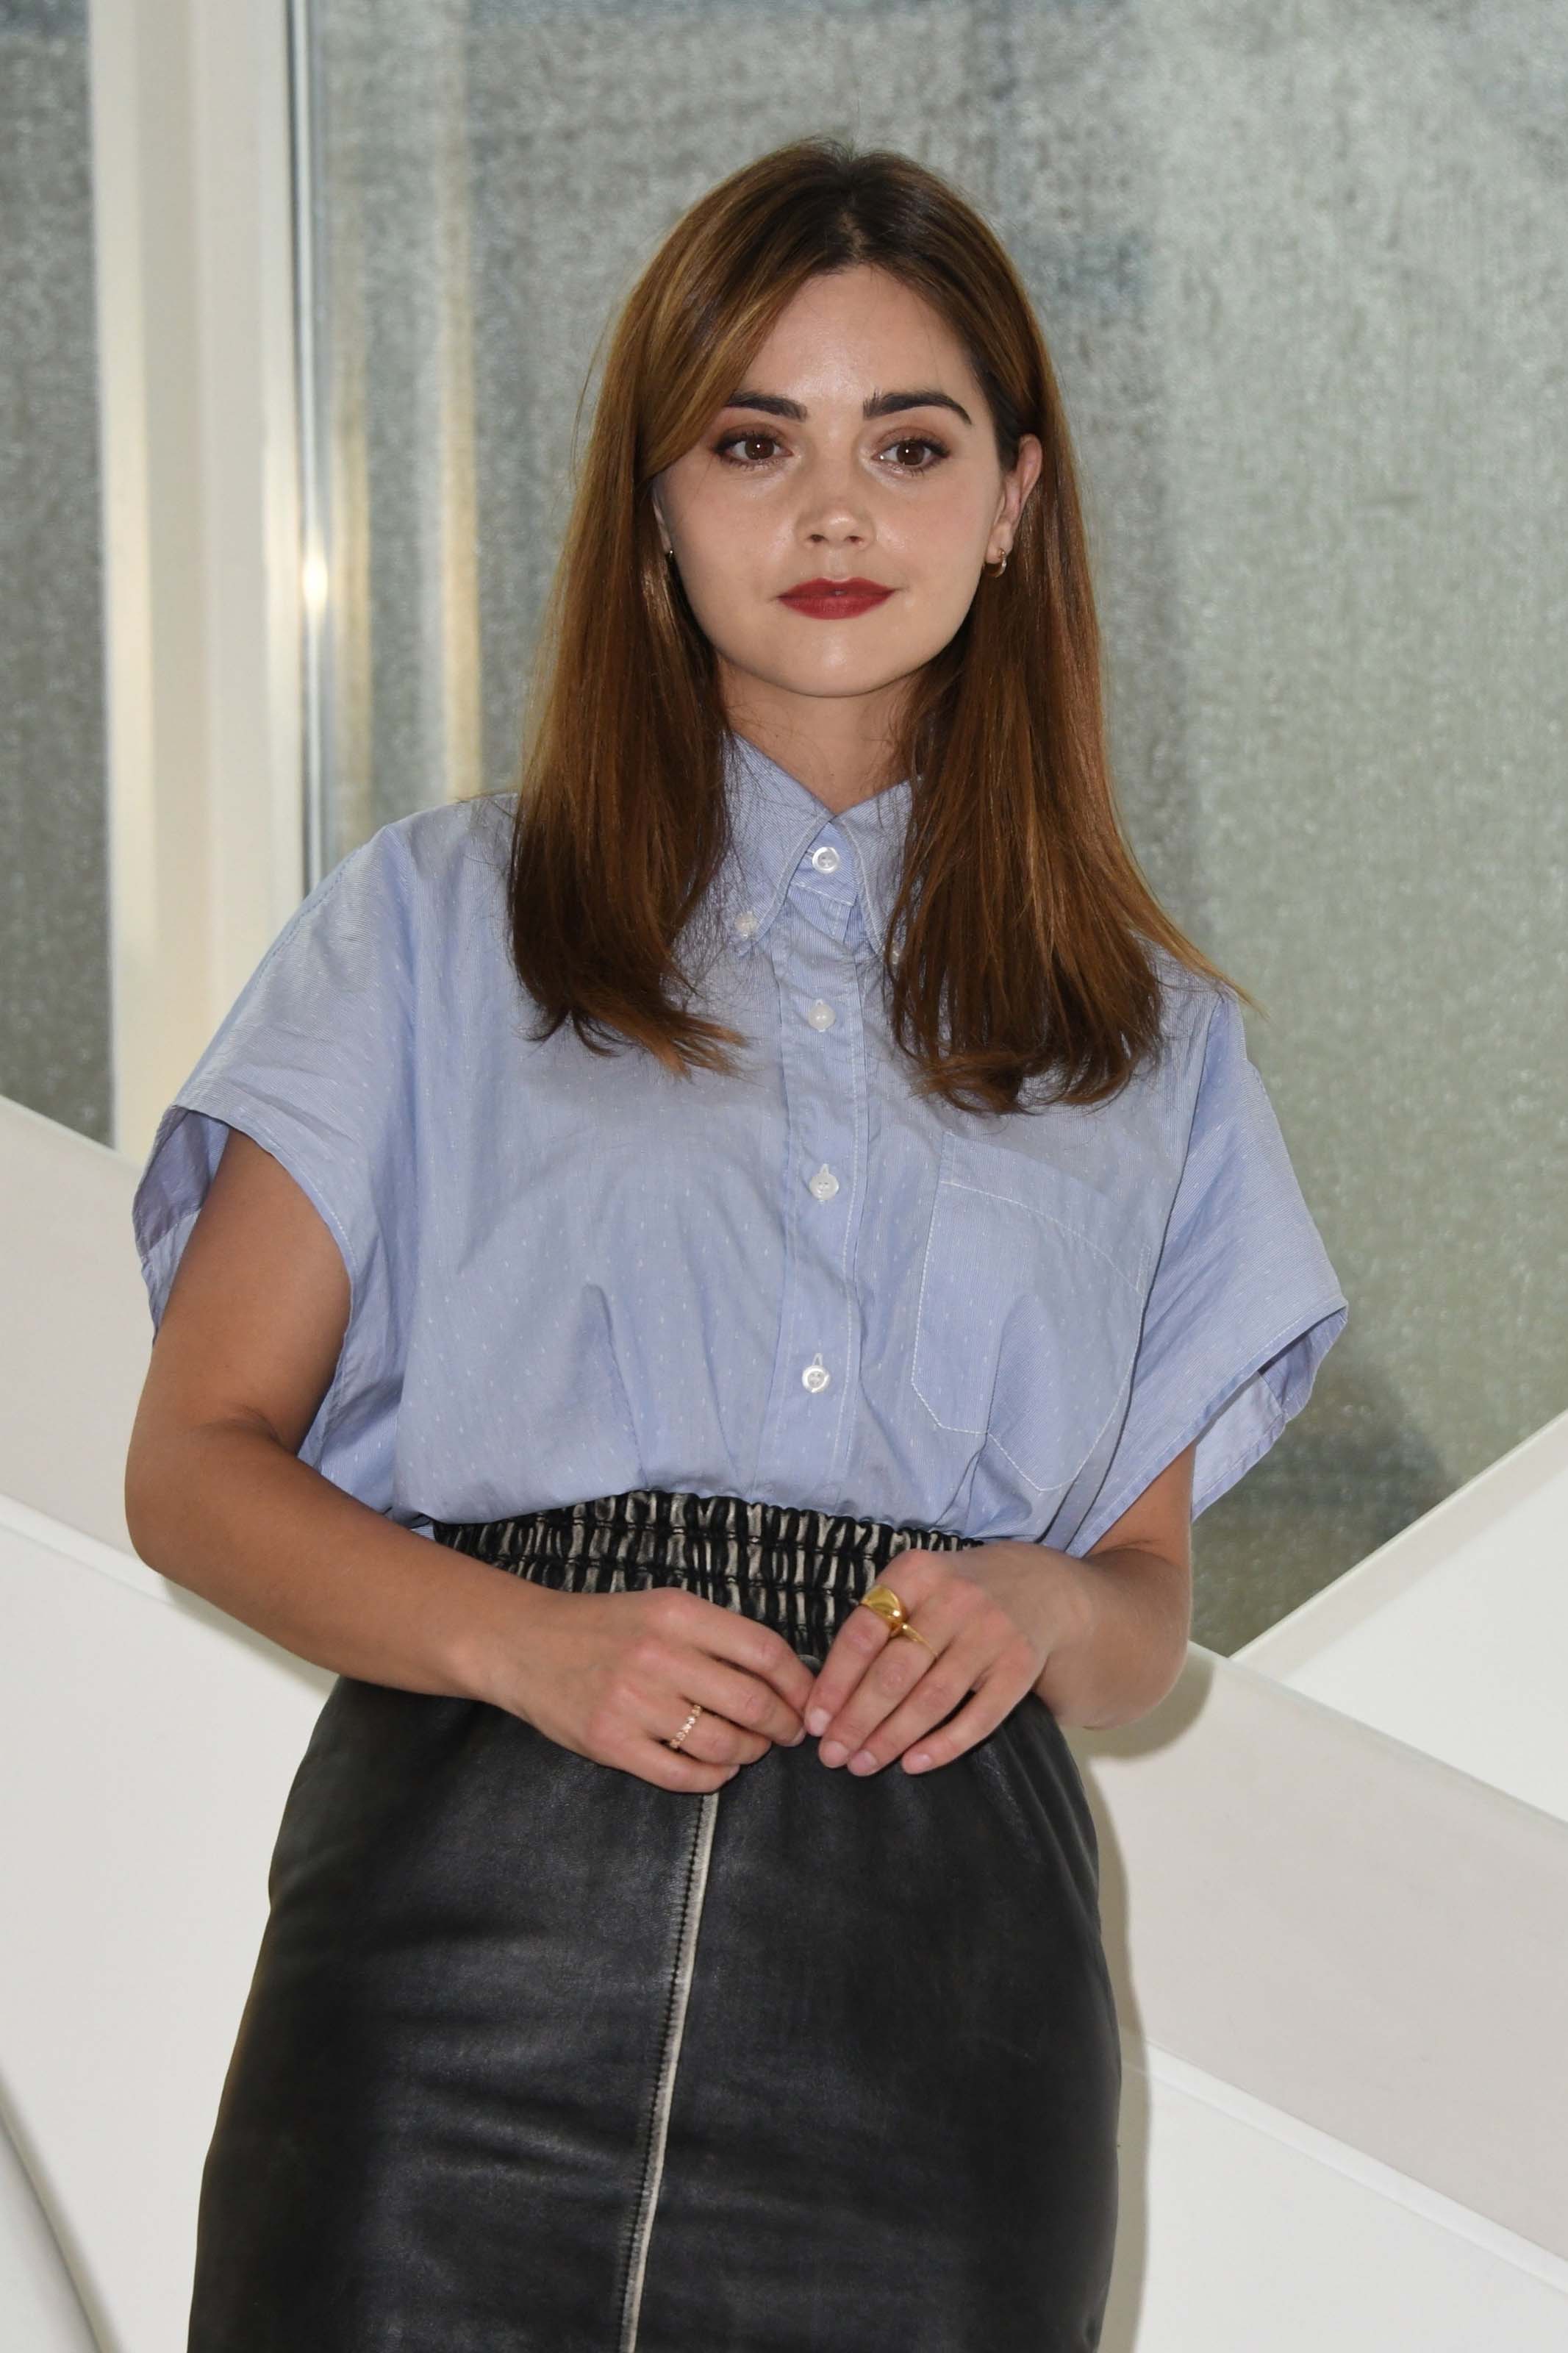 Jenna-Louise Coleman attends The Cry photocall